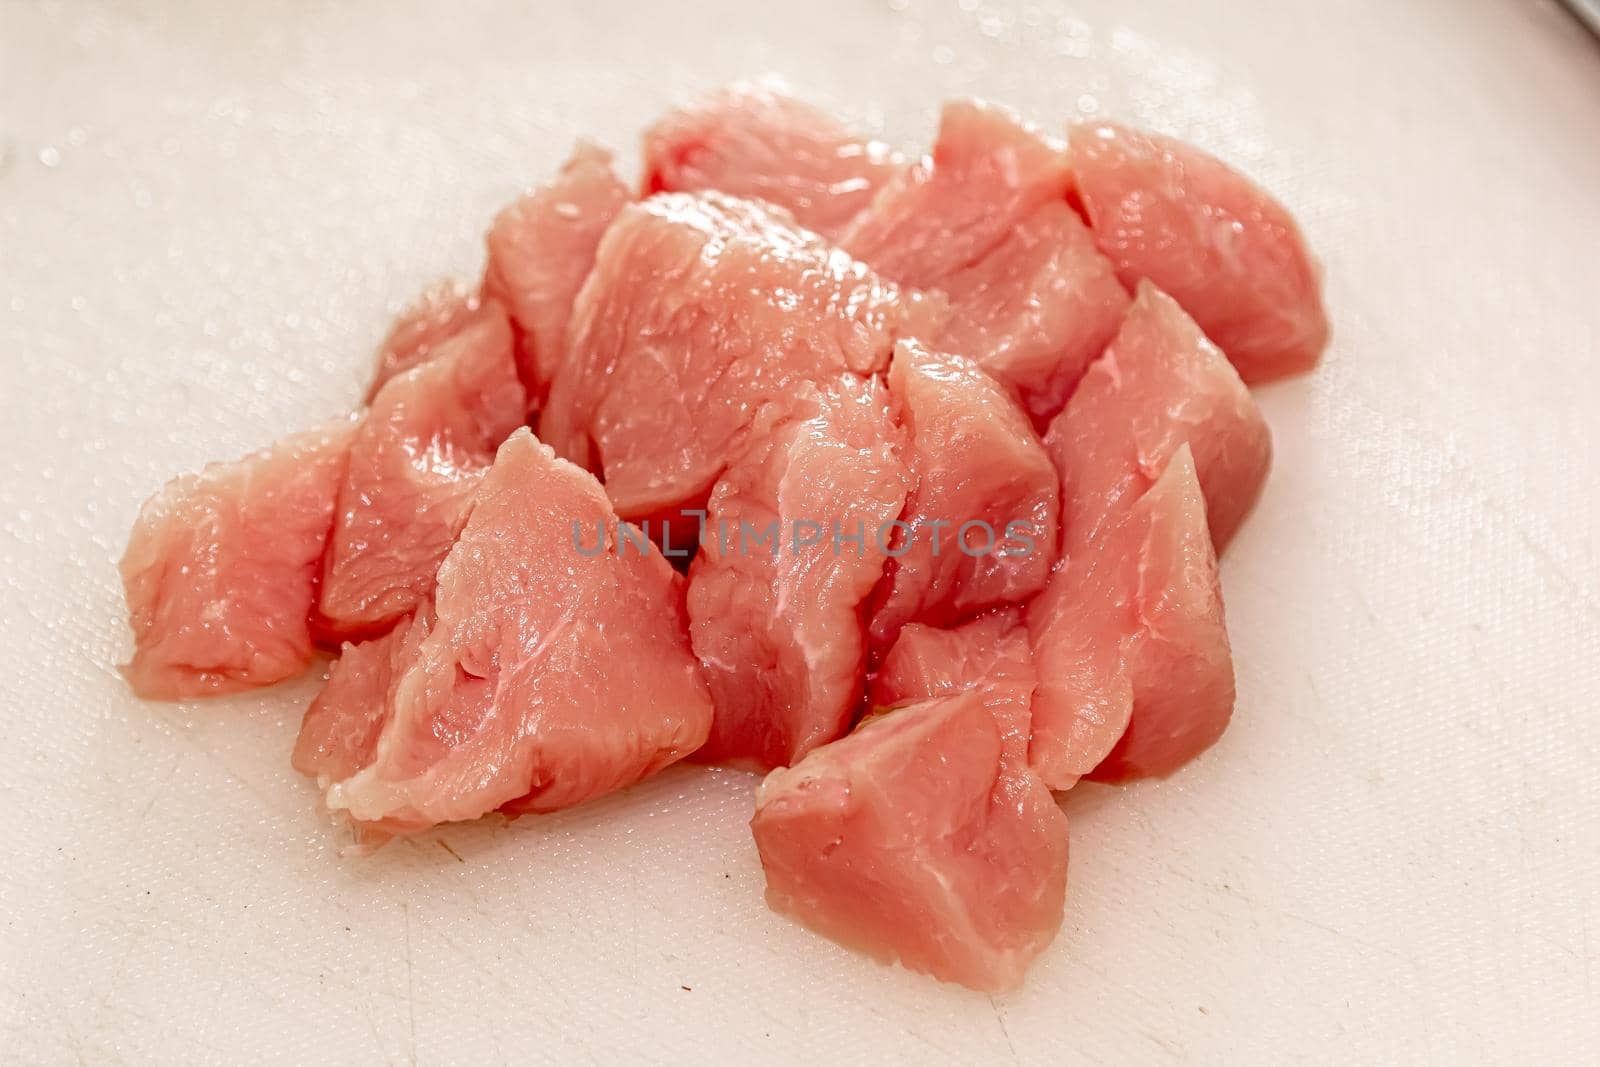 Turkey lean raw fillet and spices on rustic concrete background with knife from above flat lay, healthy diet turkey meat ready to be cooked by Milanchikov